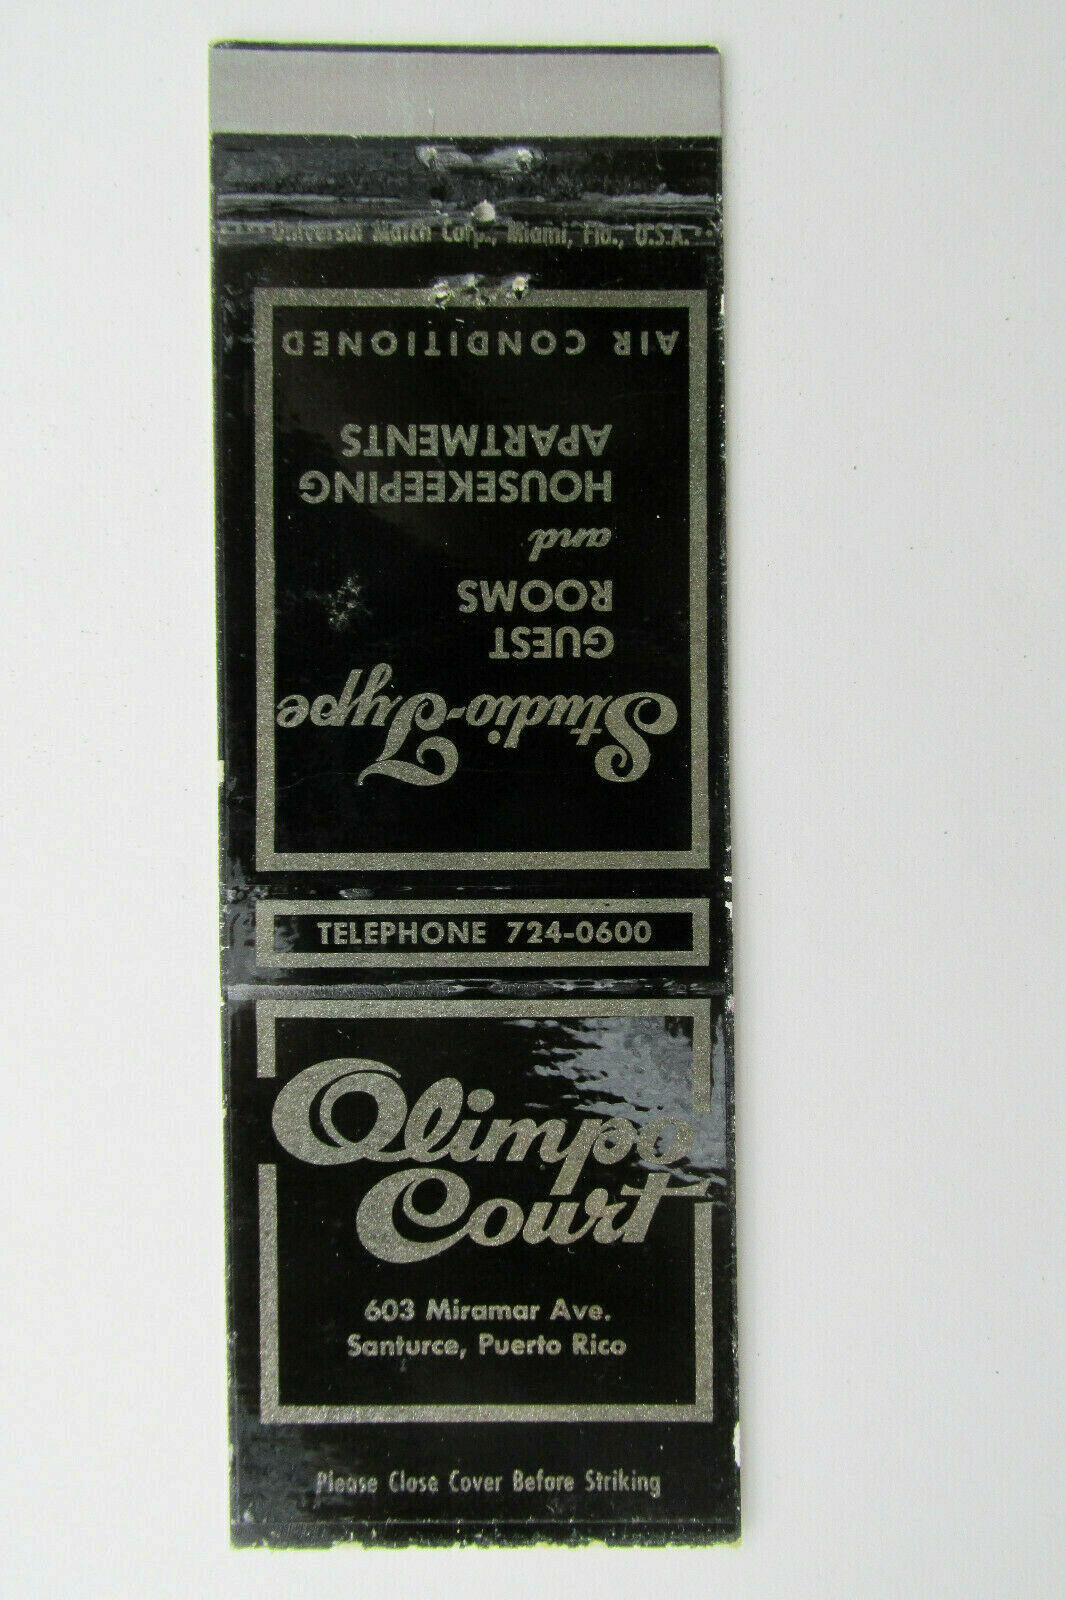 Primary image for Olimpo Court - Santurce, Puerto Rico Hotel 20 Strike Matchbook Cover Matchcover